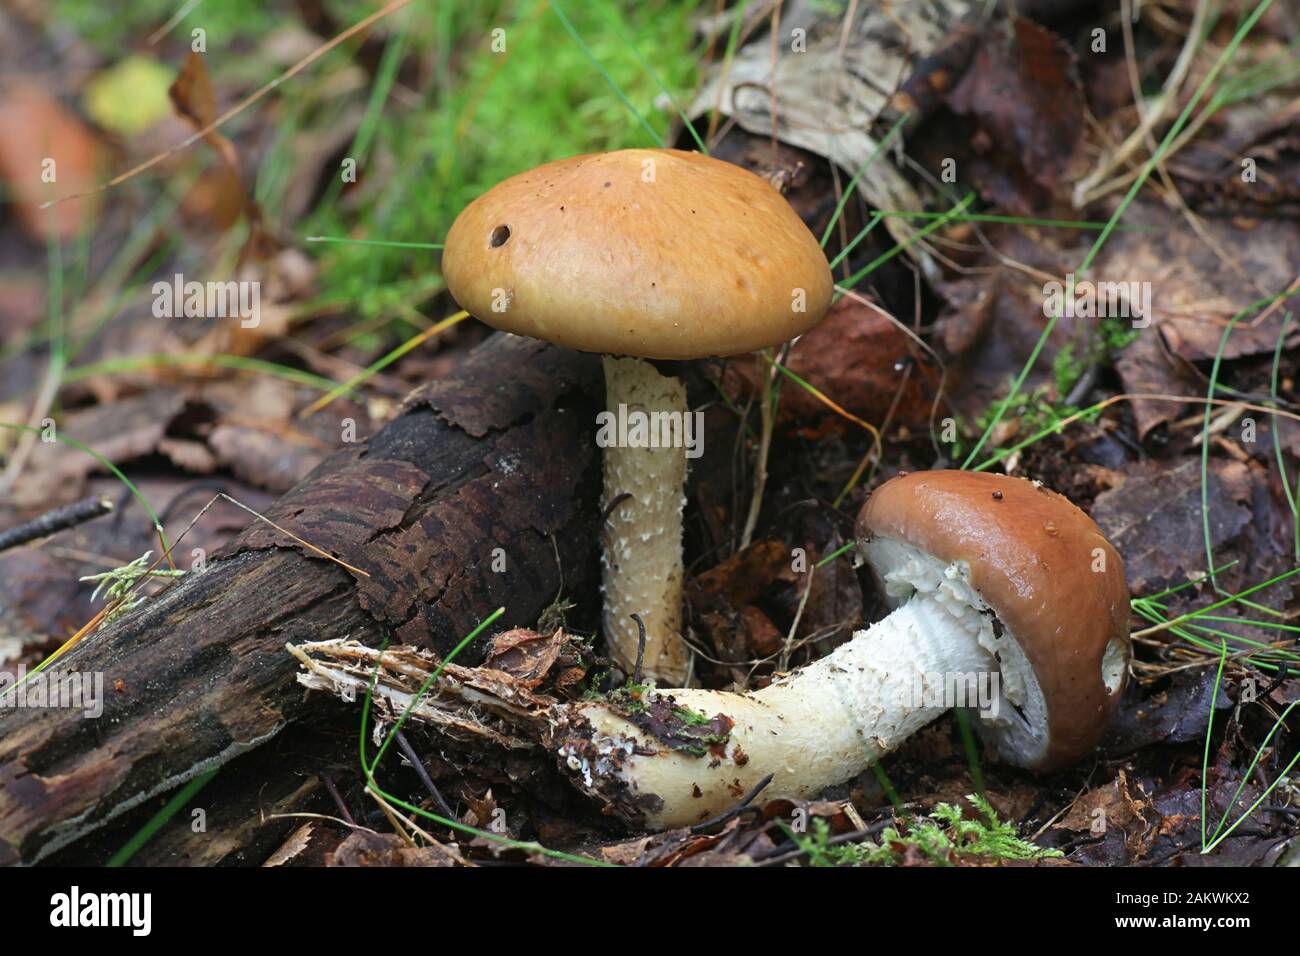 Stropharia hornemannii, known as luxuriant ringstalk or lacerated stropharia, poisonous mushrooms from Finland Stock Photo